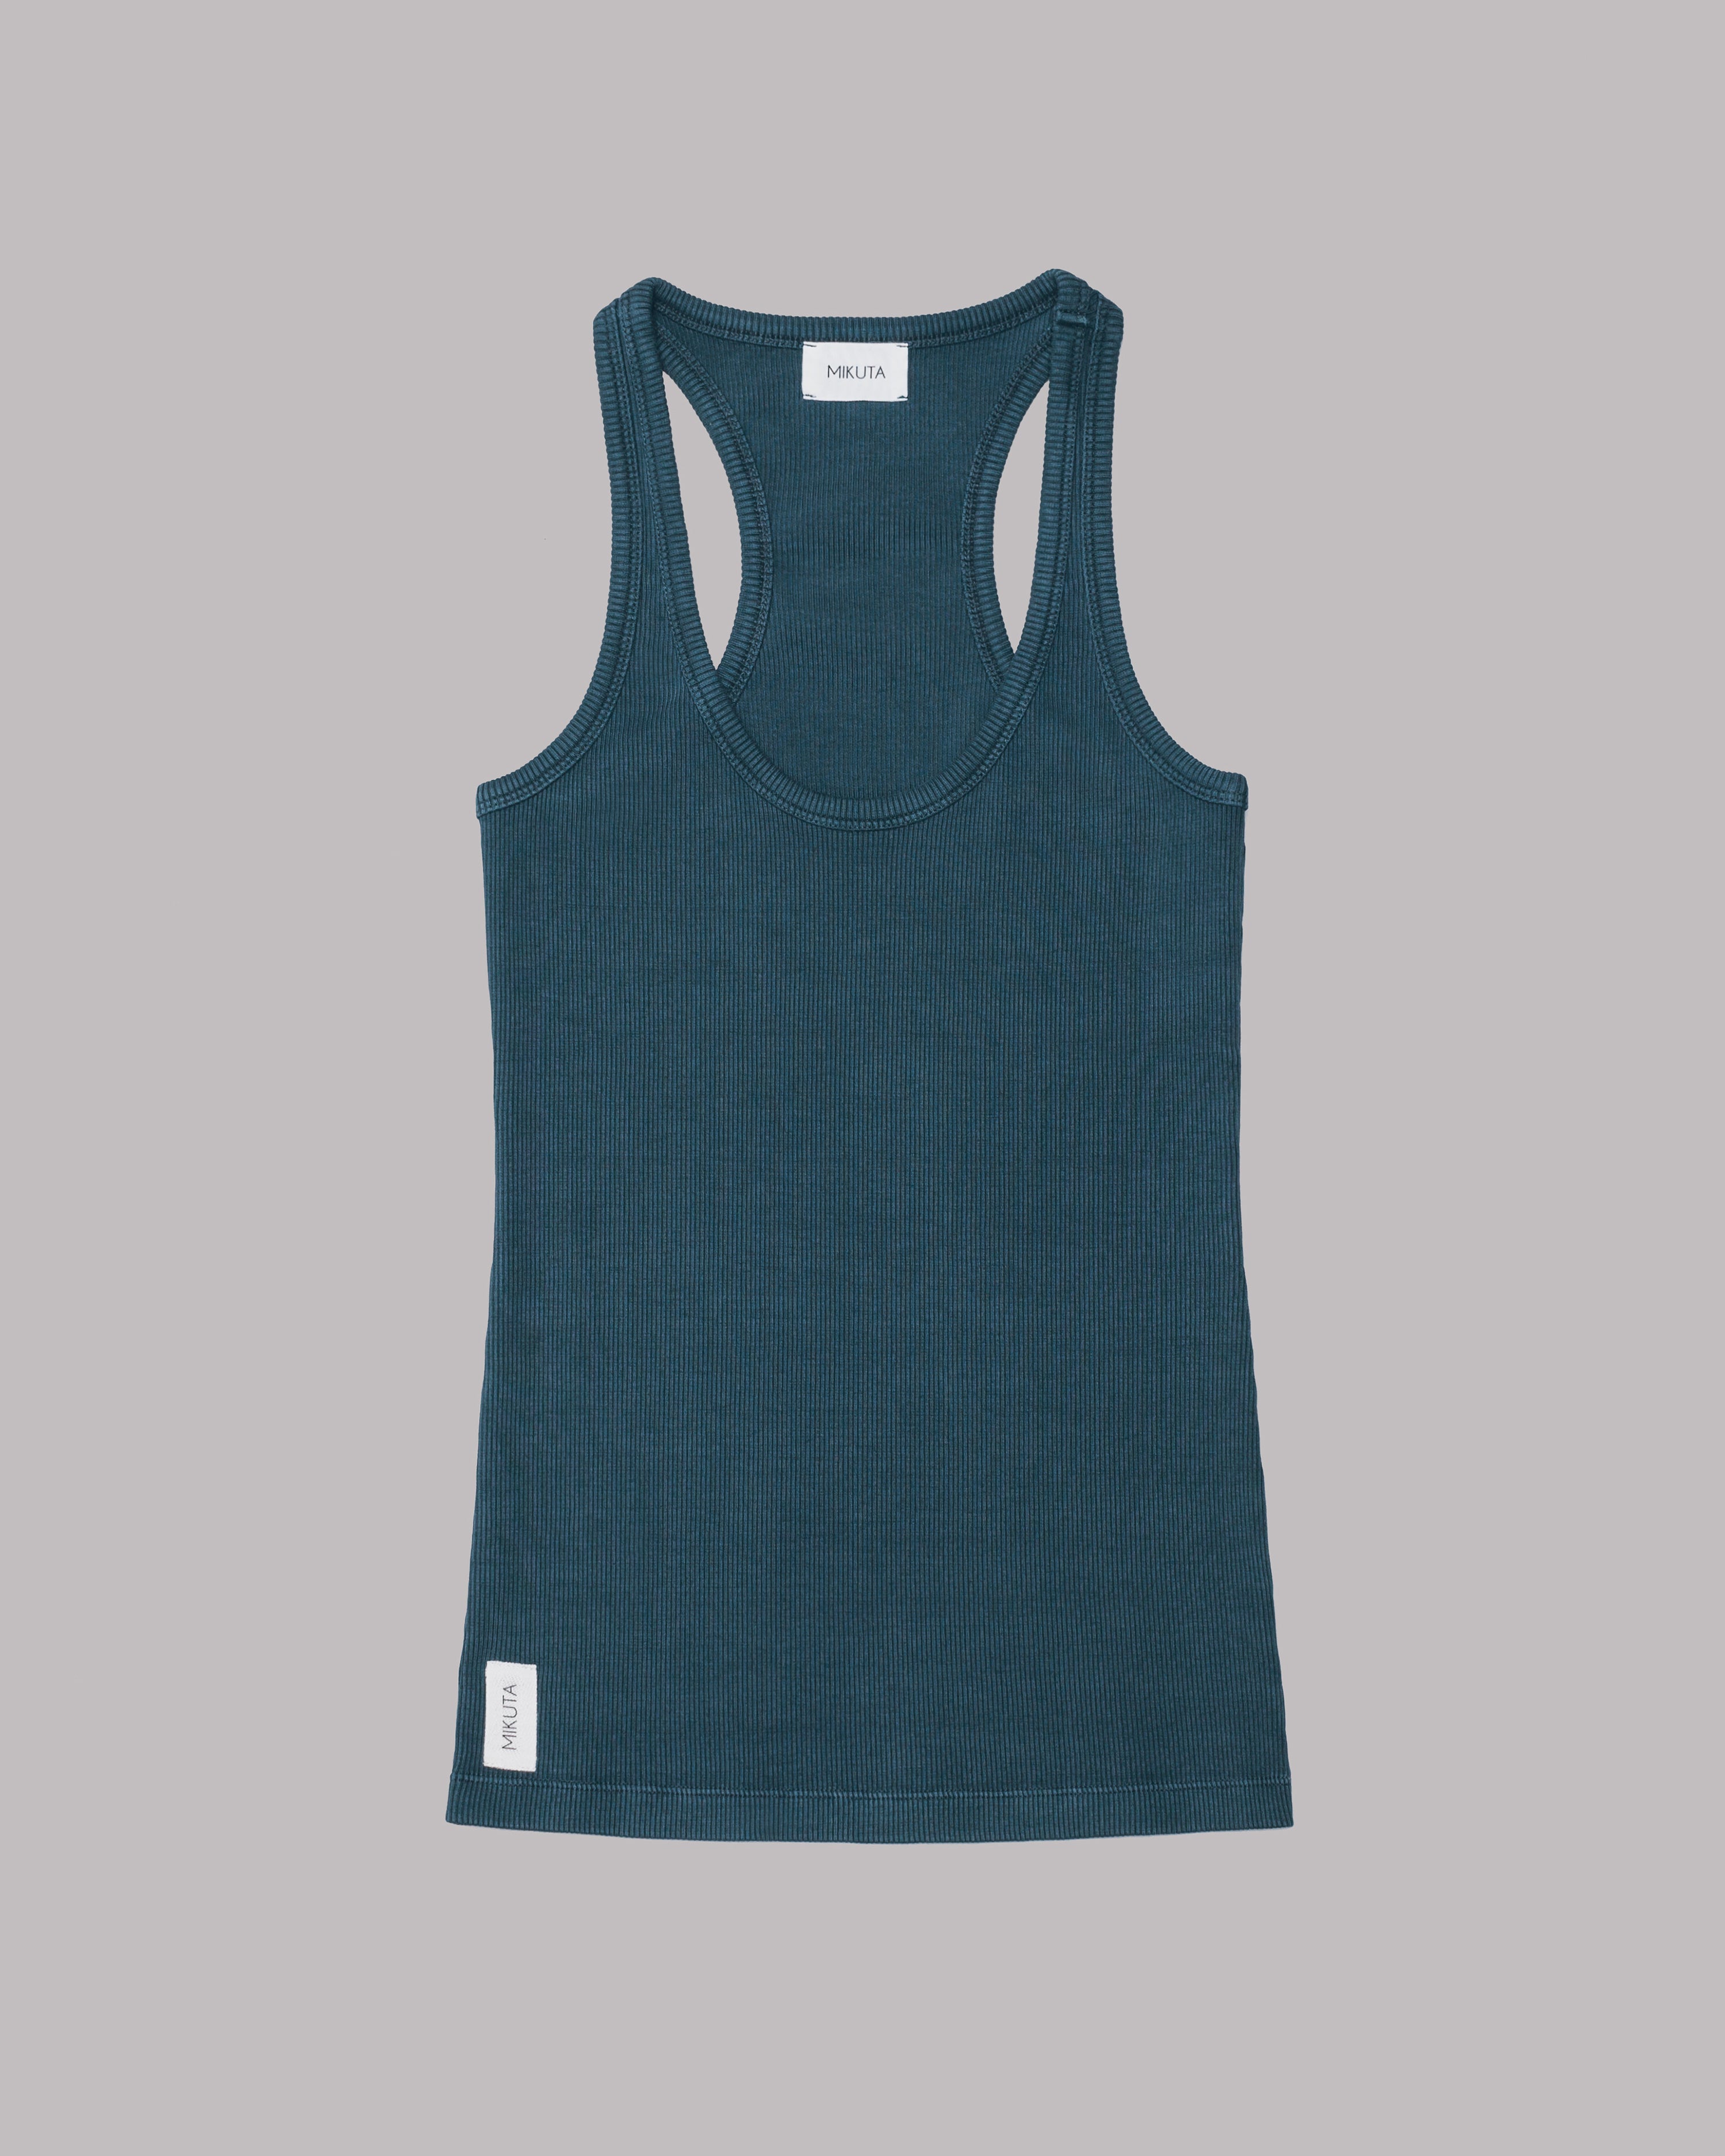 The Teal Ribbed Tank Top